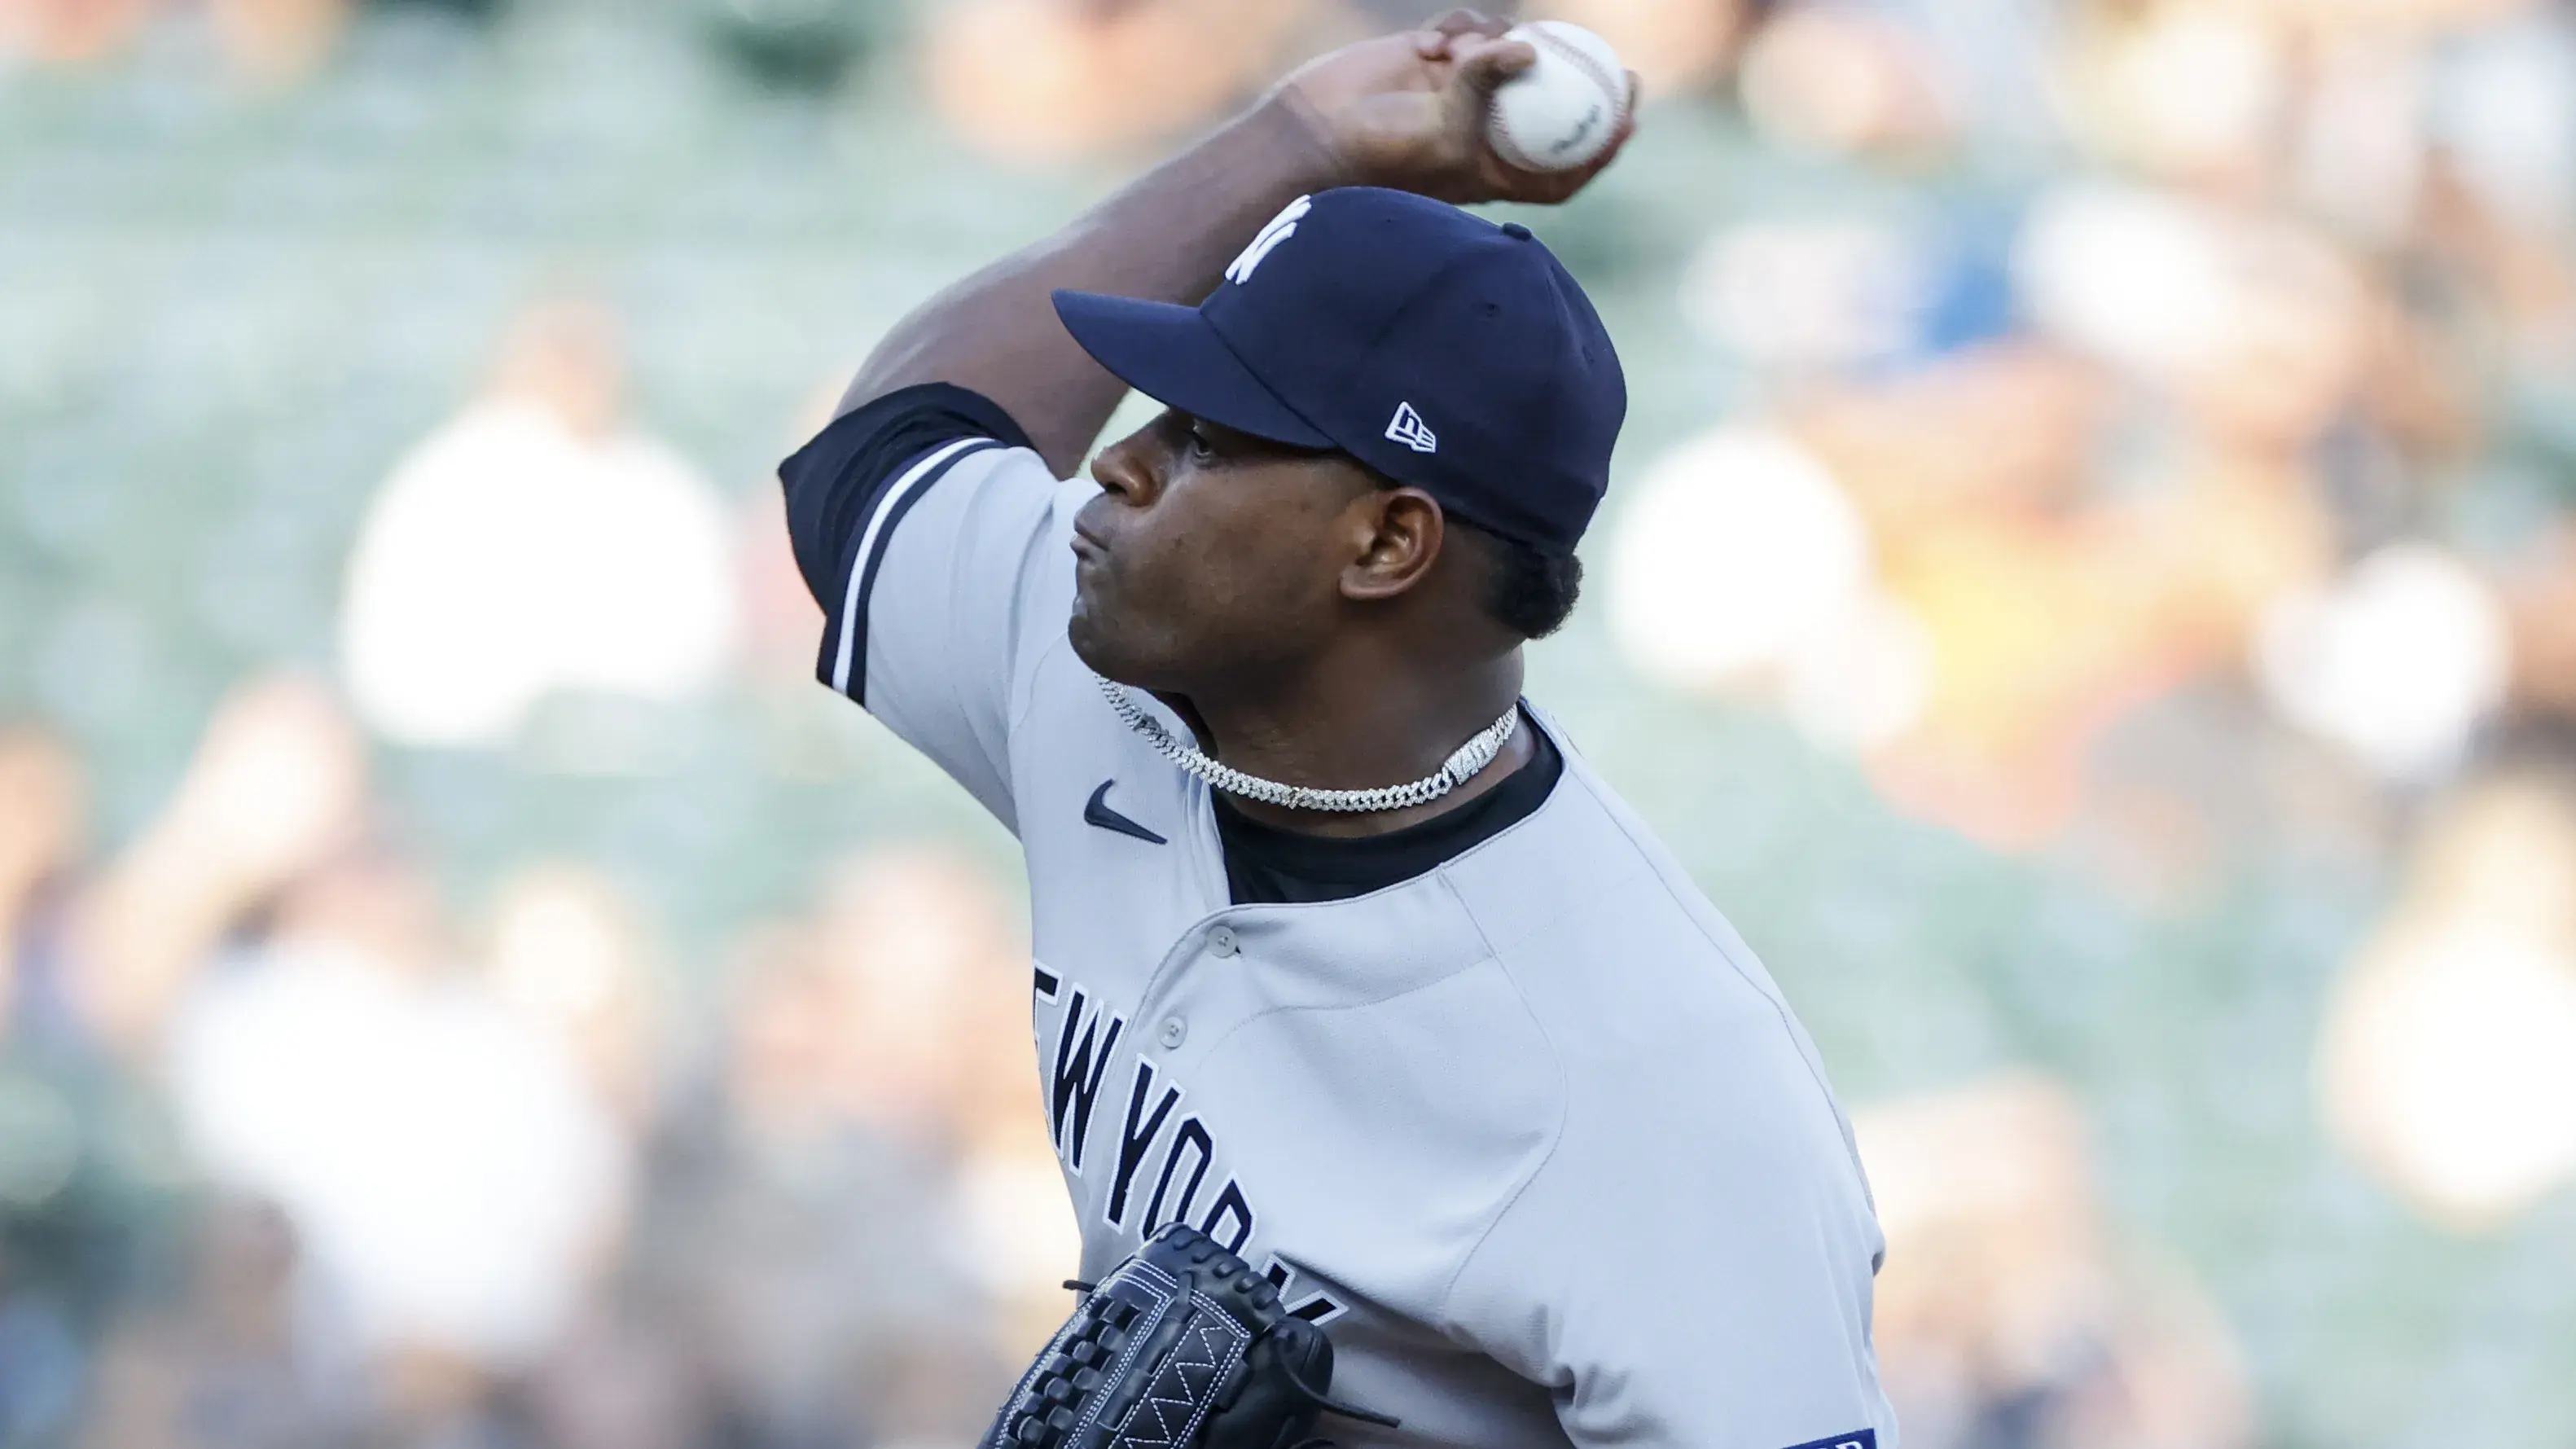 New York Yankees starting pitcher Luis Severino (40) pitches in the first inning against the Detroit Tigers at Comerica Park / Rick Osentoski - USA TODAY Sports